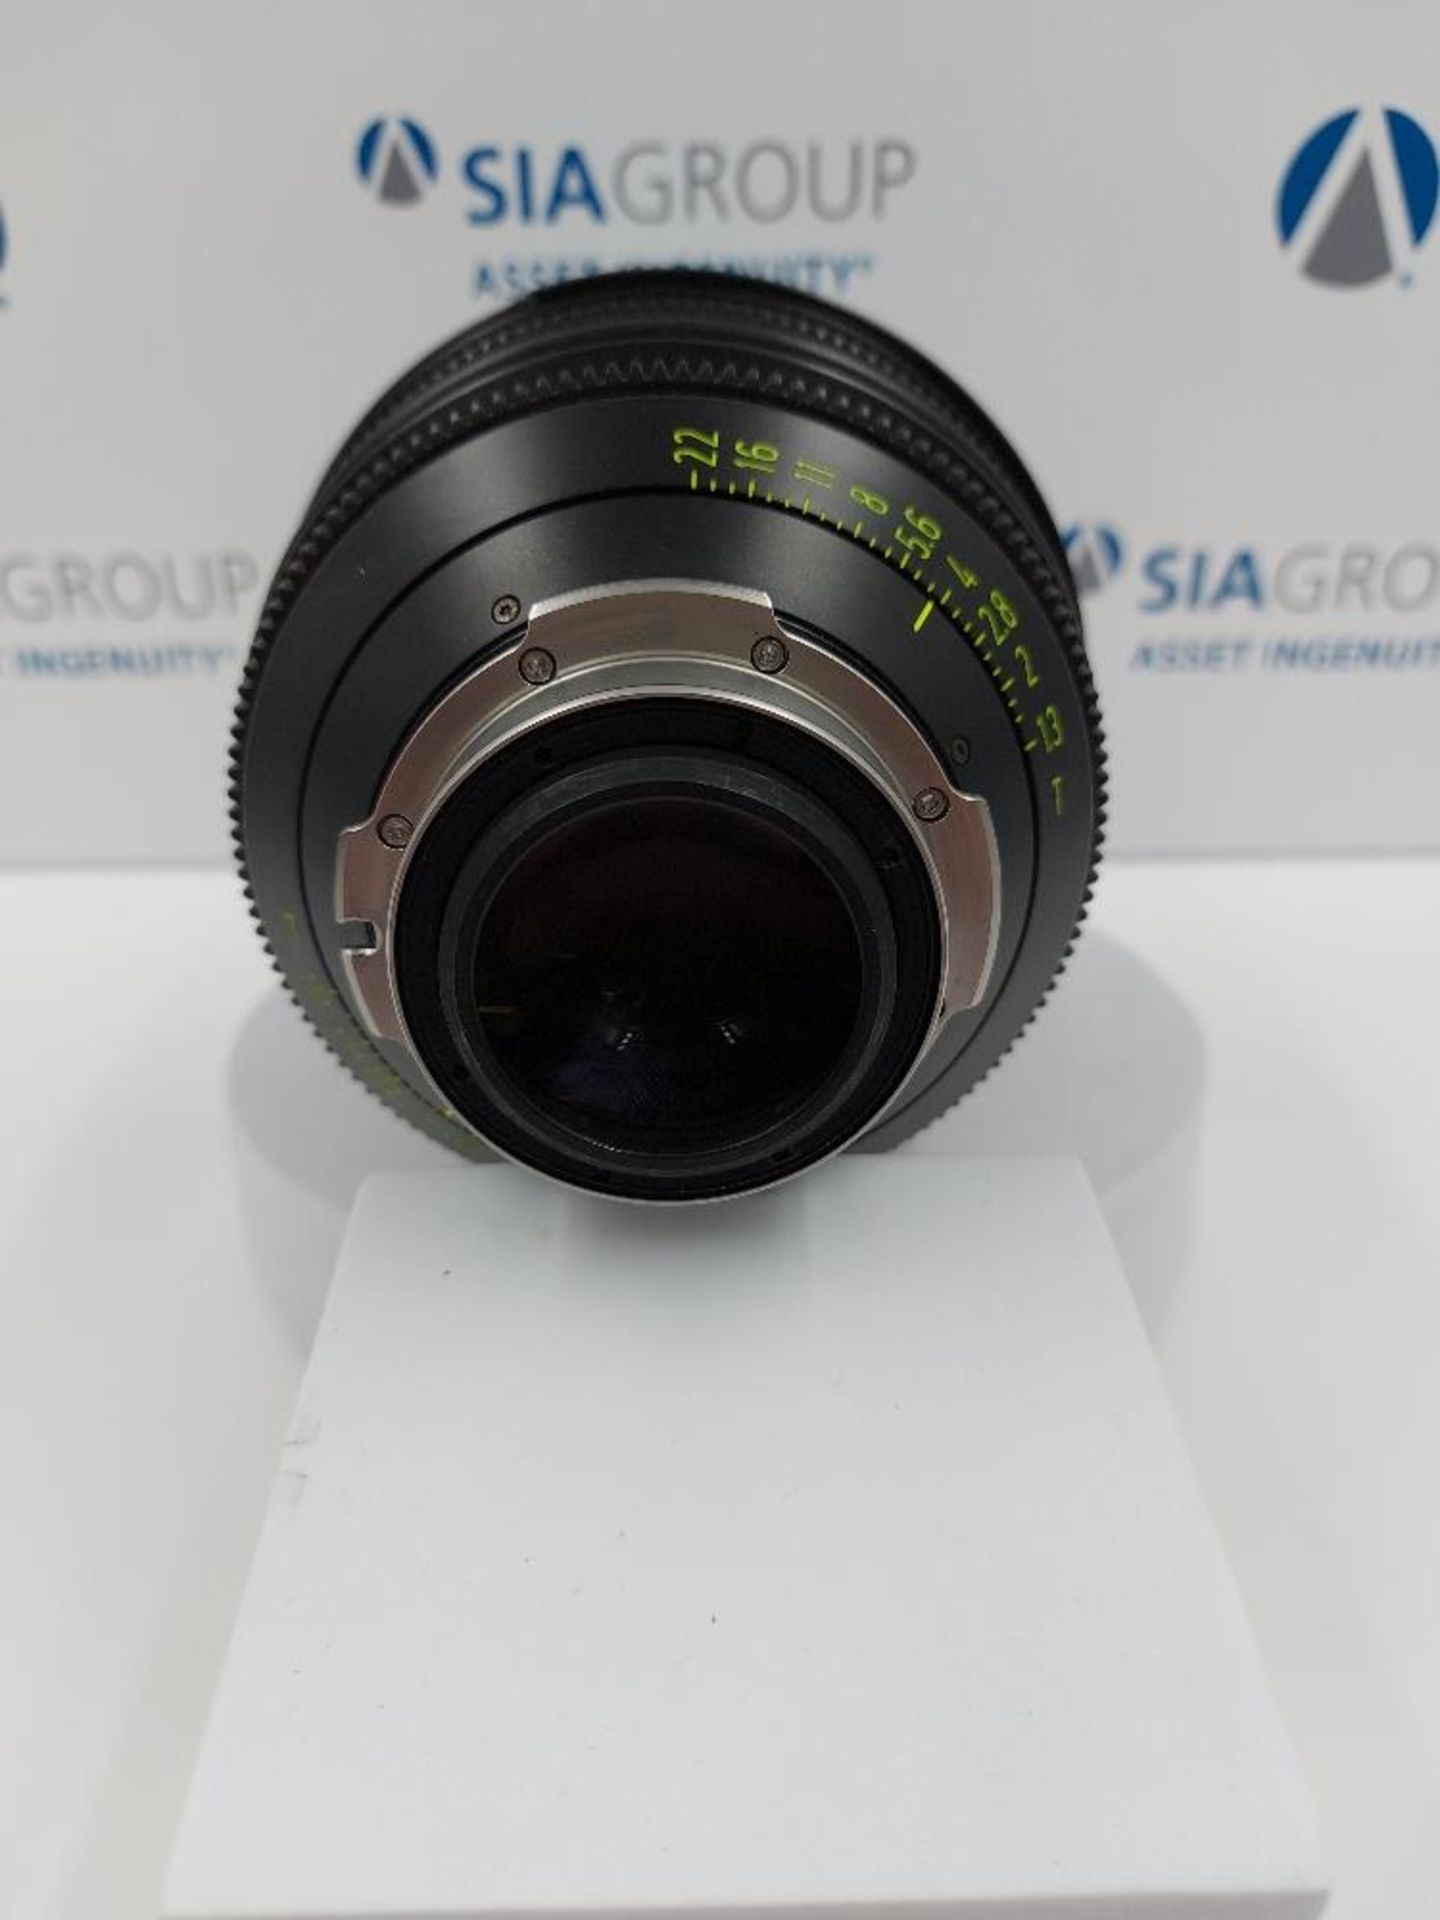 Zeiss ARRI Master Prime 75mm T1.3 Lens with PL Mount - Image 6 of 6